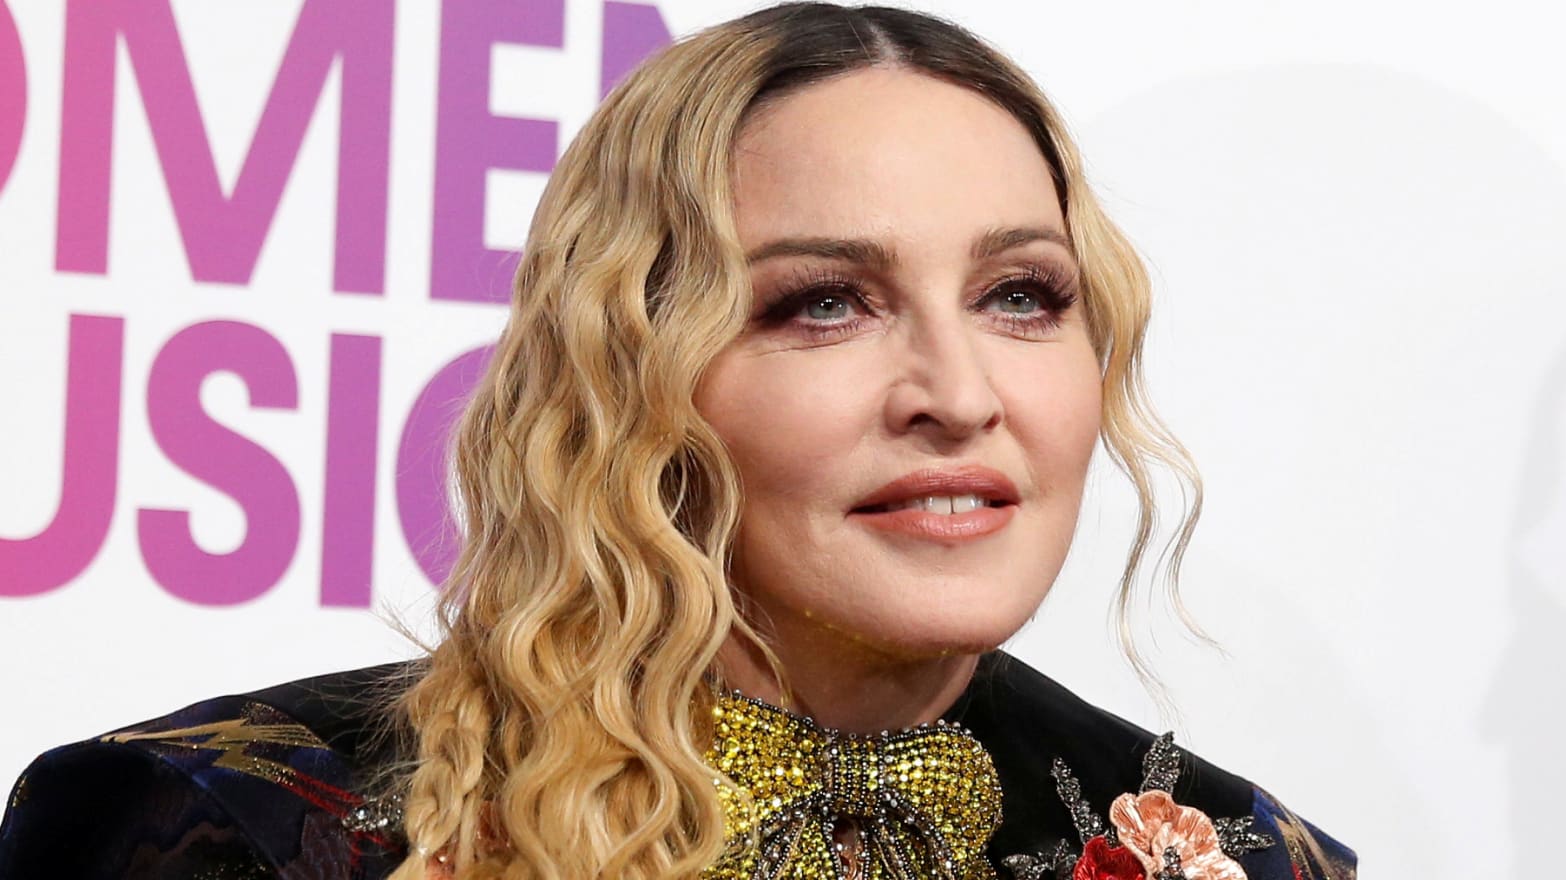 Madonna Recovering in Hospital After Being Found Unresponsive